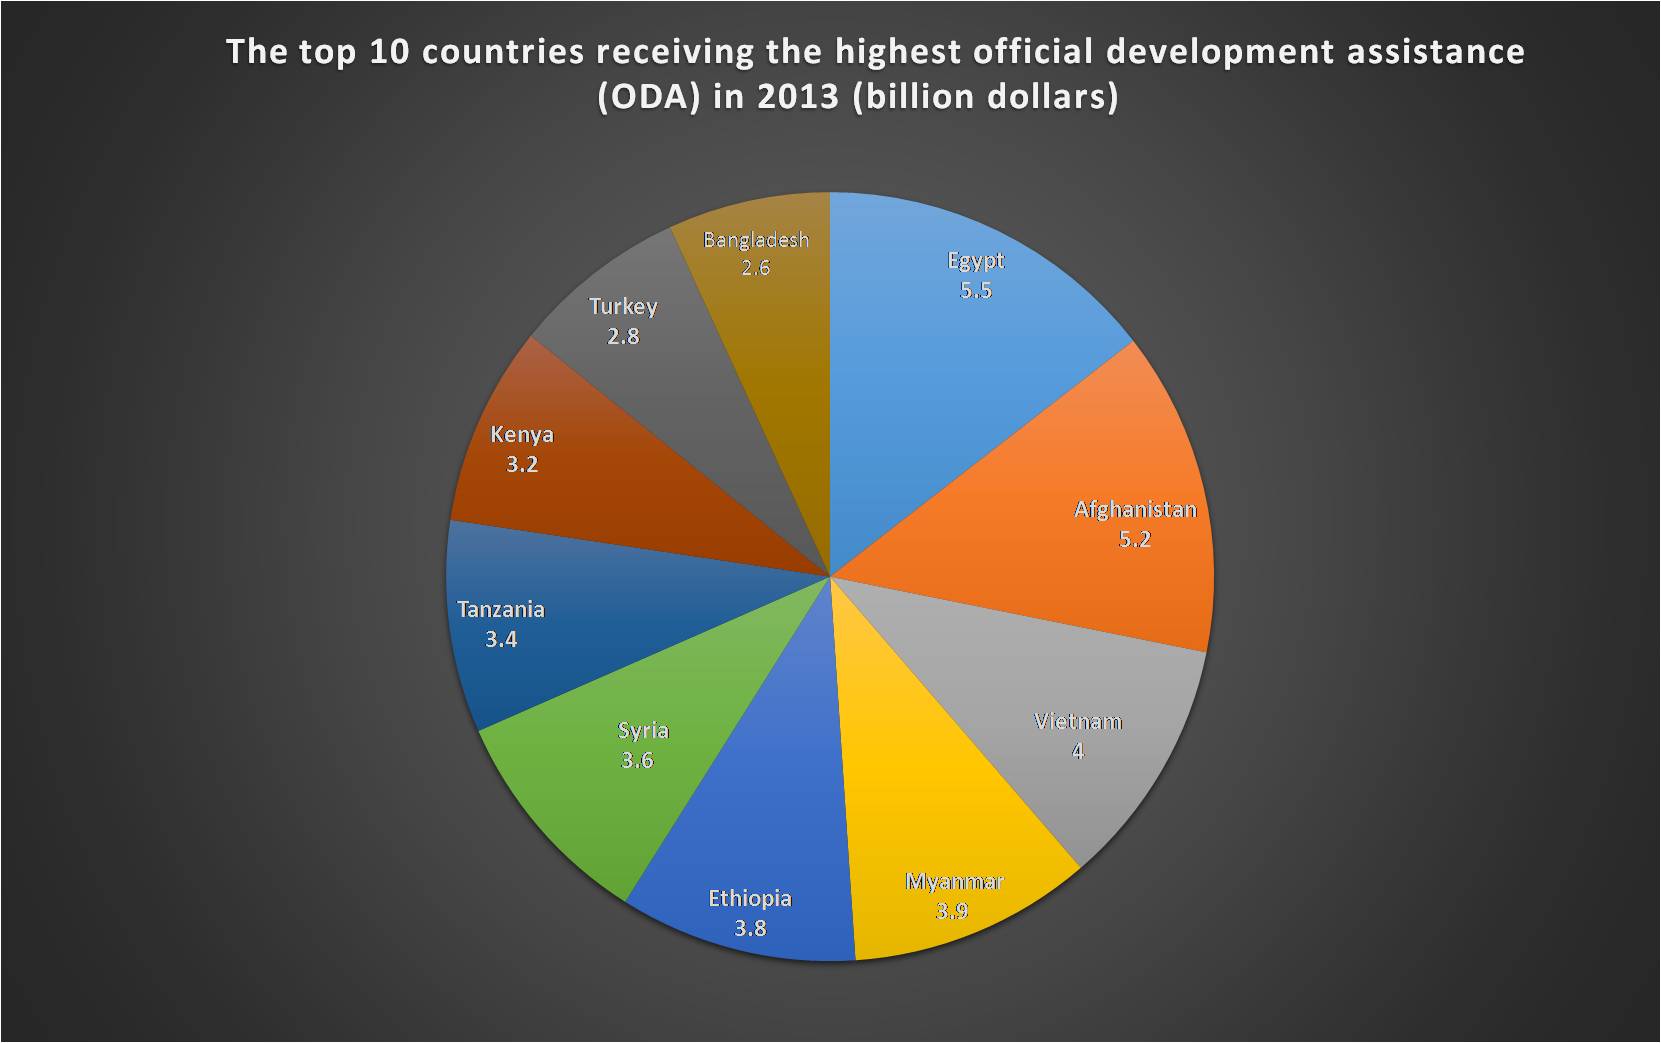 Egypt top recipient of aid at $5.5 bln in 2013 - UN report 